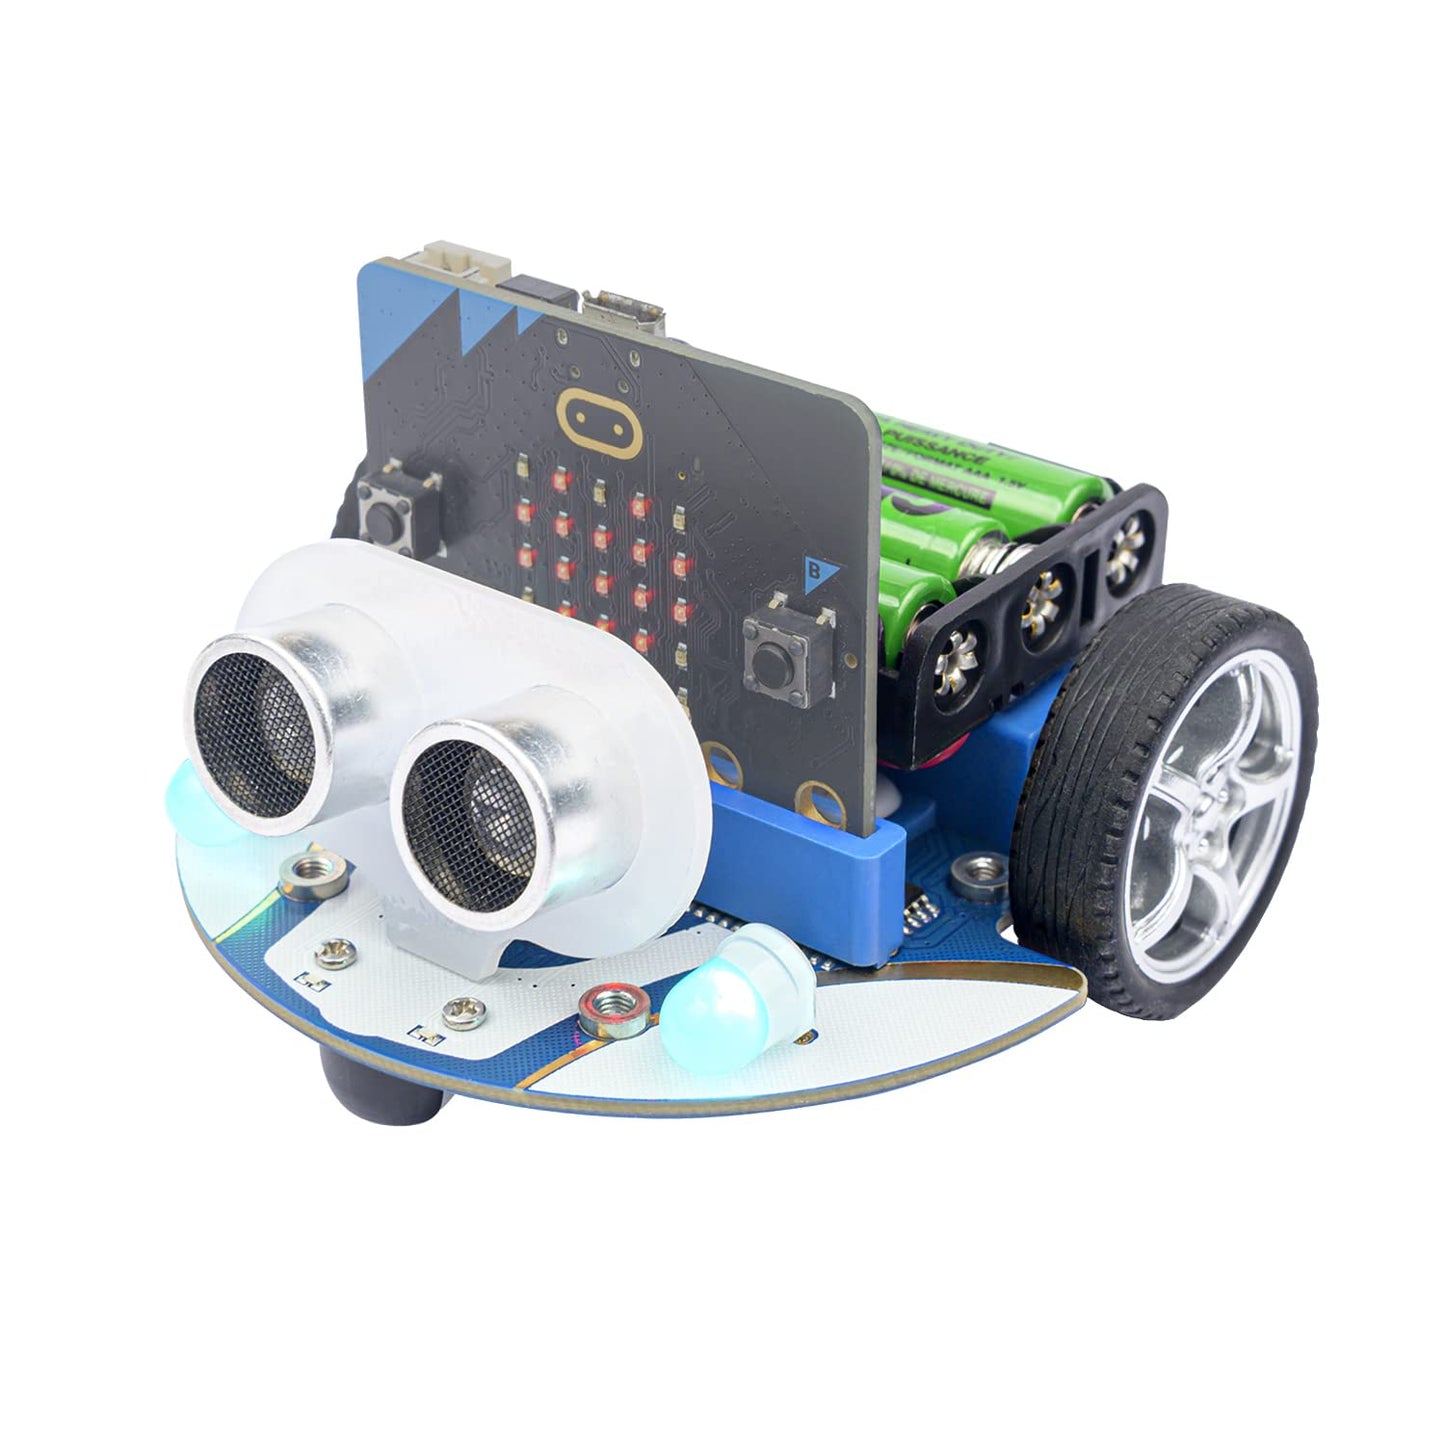 ELECFREAKS microbit Mini Cutebot Kit Compatible with BBC Micro:bit V2 and V1, DIY Programmable Robot Car Kit, STEM Educational Project, Graphical Makecode Coding Car with Tutorial (Without Micro:bit)